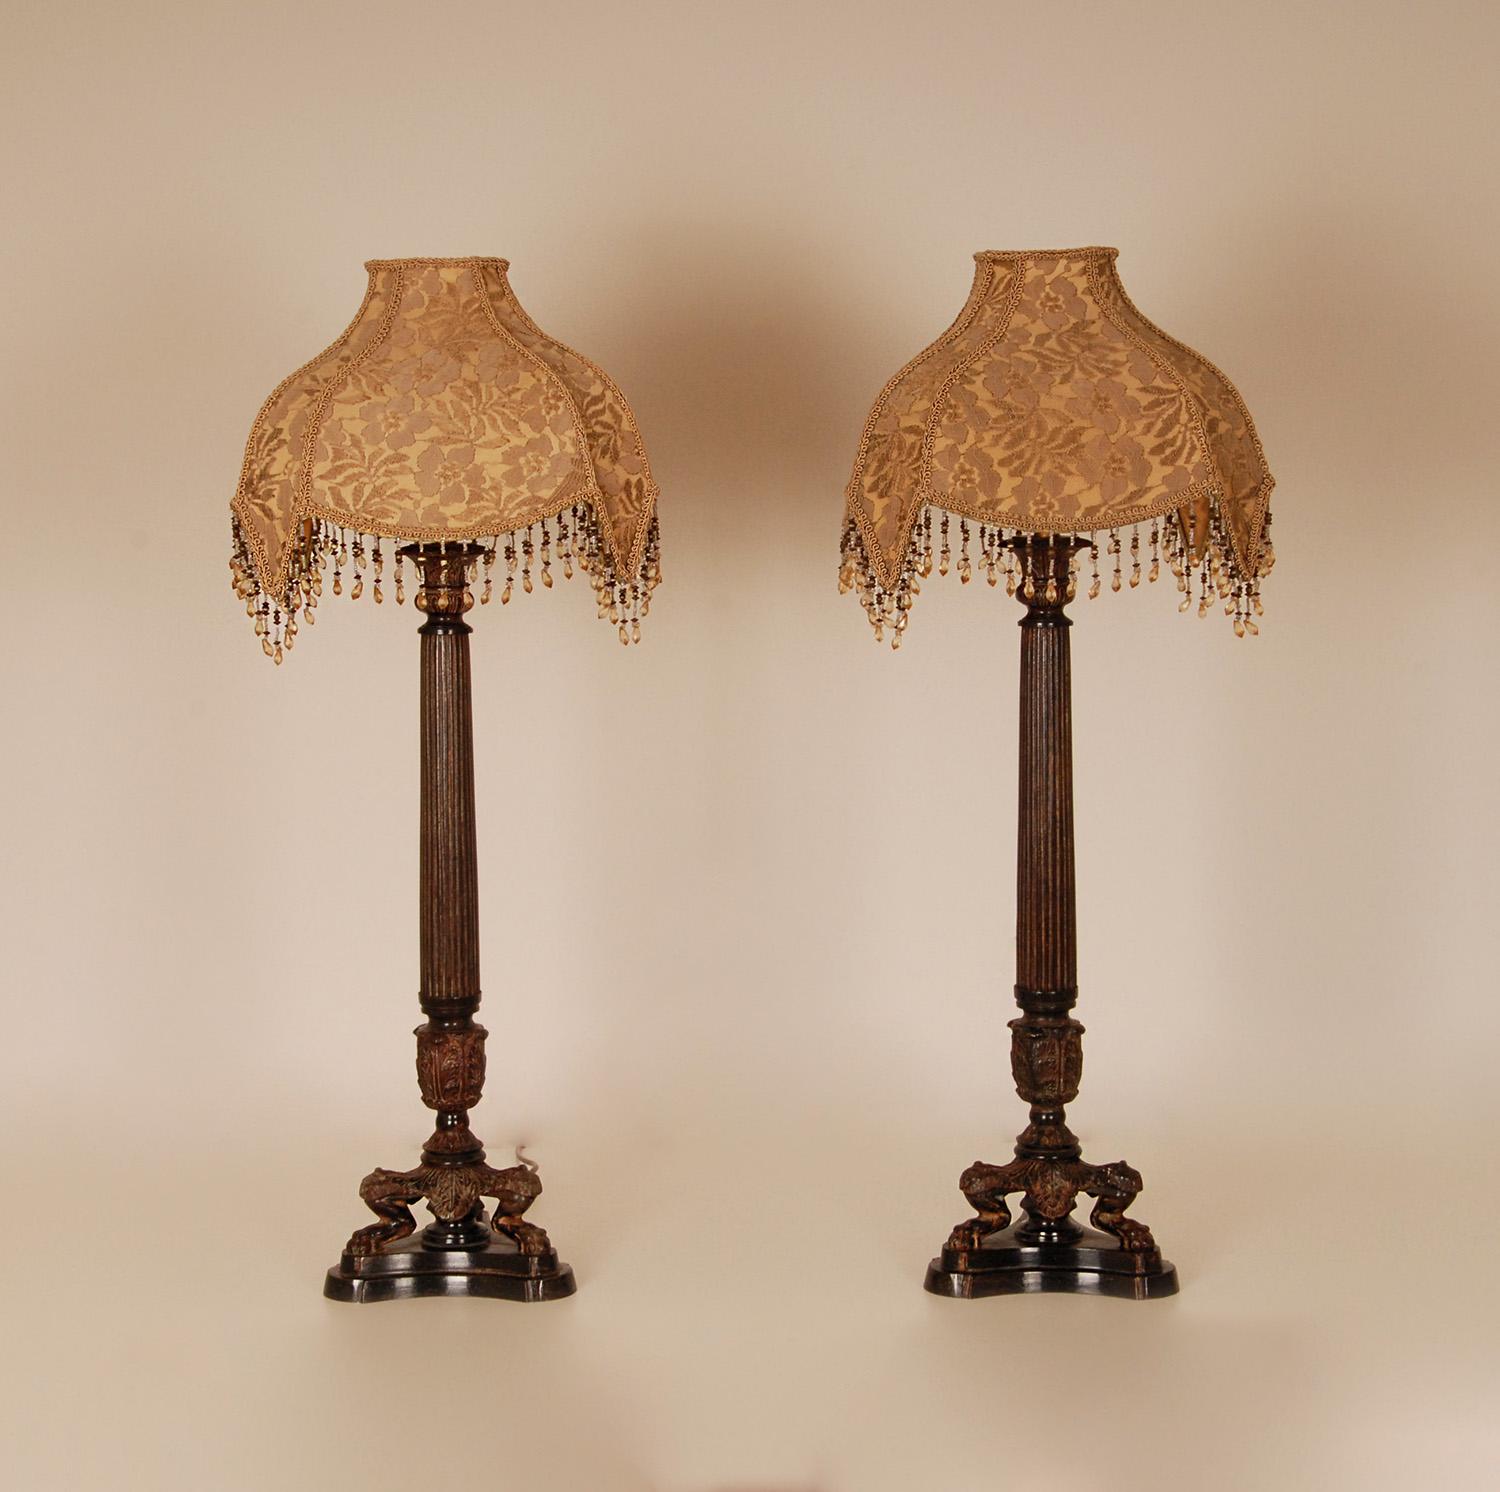 Silk Antique French Empire Napoleonic Table Lamps Lion Paws Cast Iron a pair 